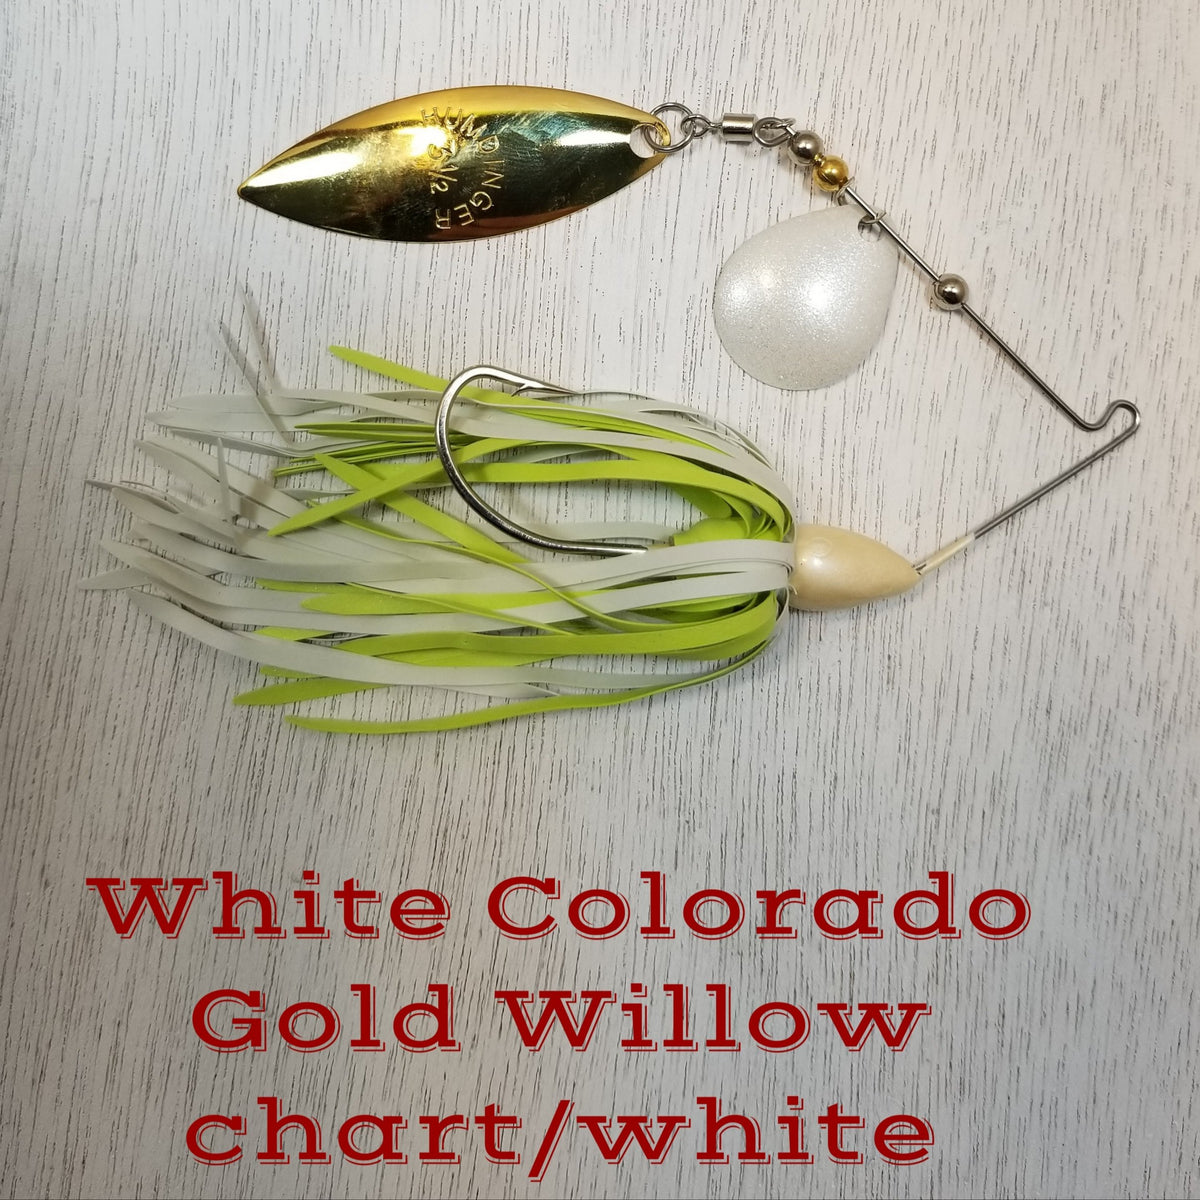 Humdinger White Colorado gold willow - chart/wht – Z's Tackle